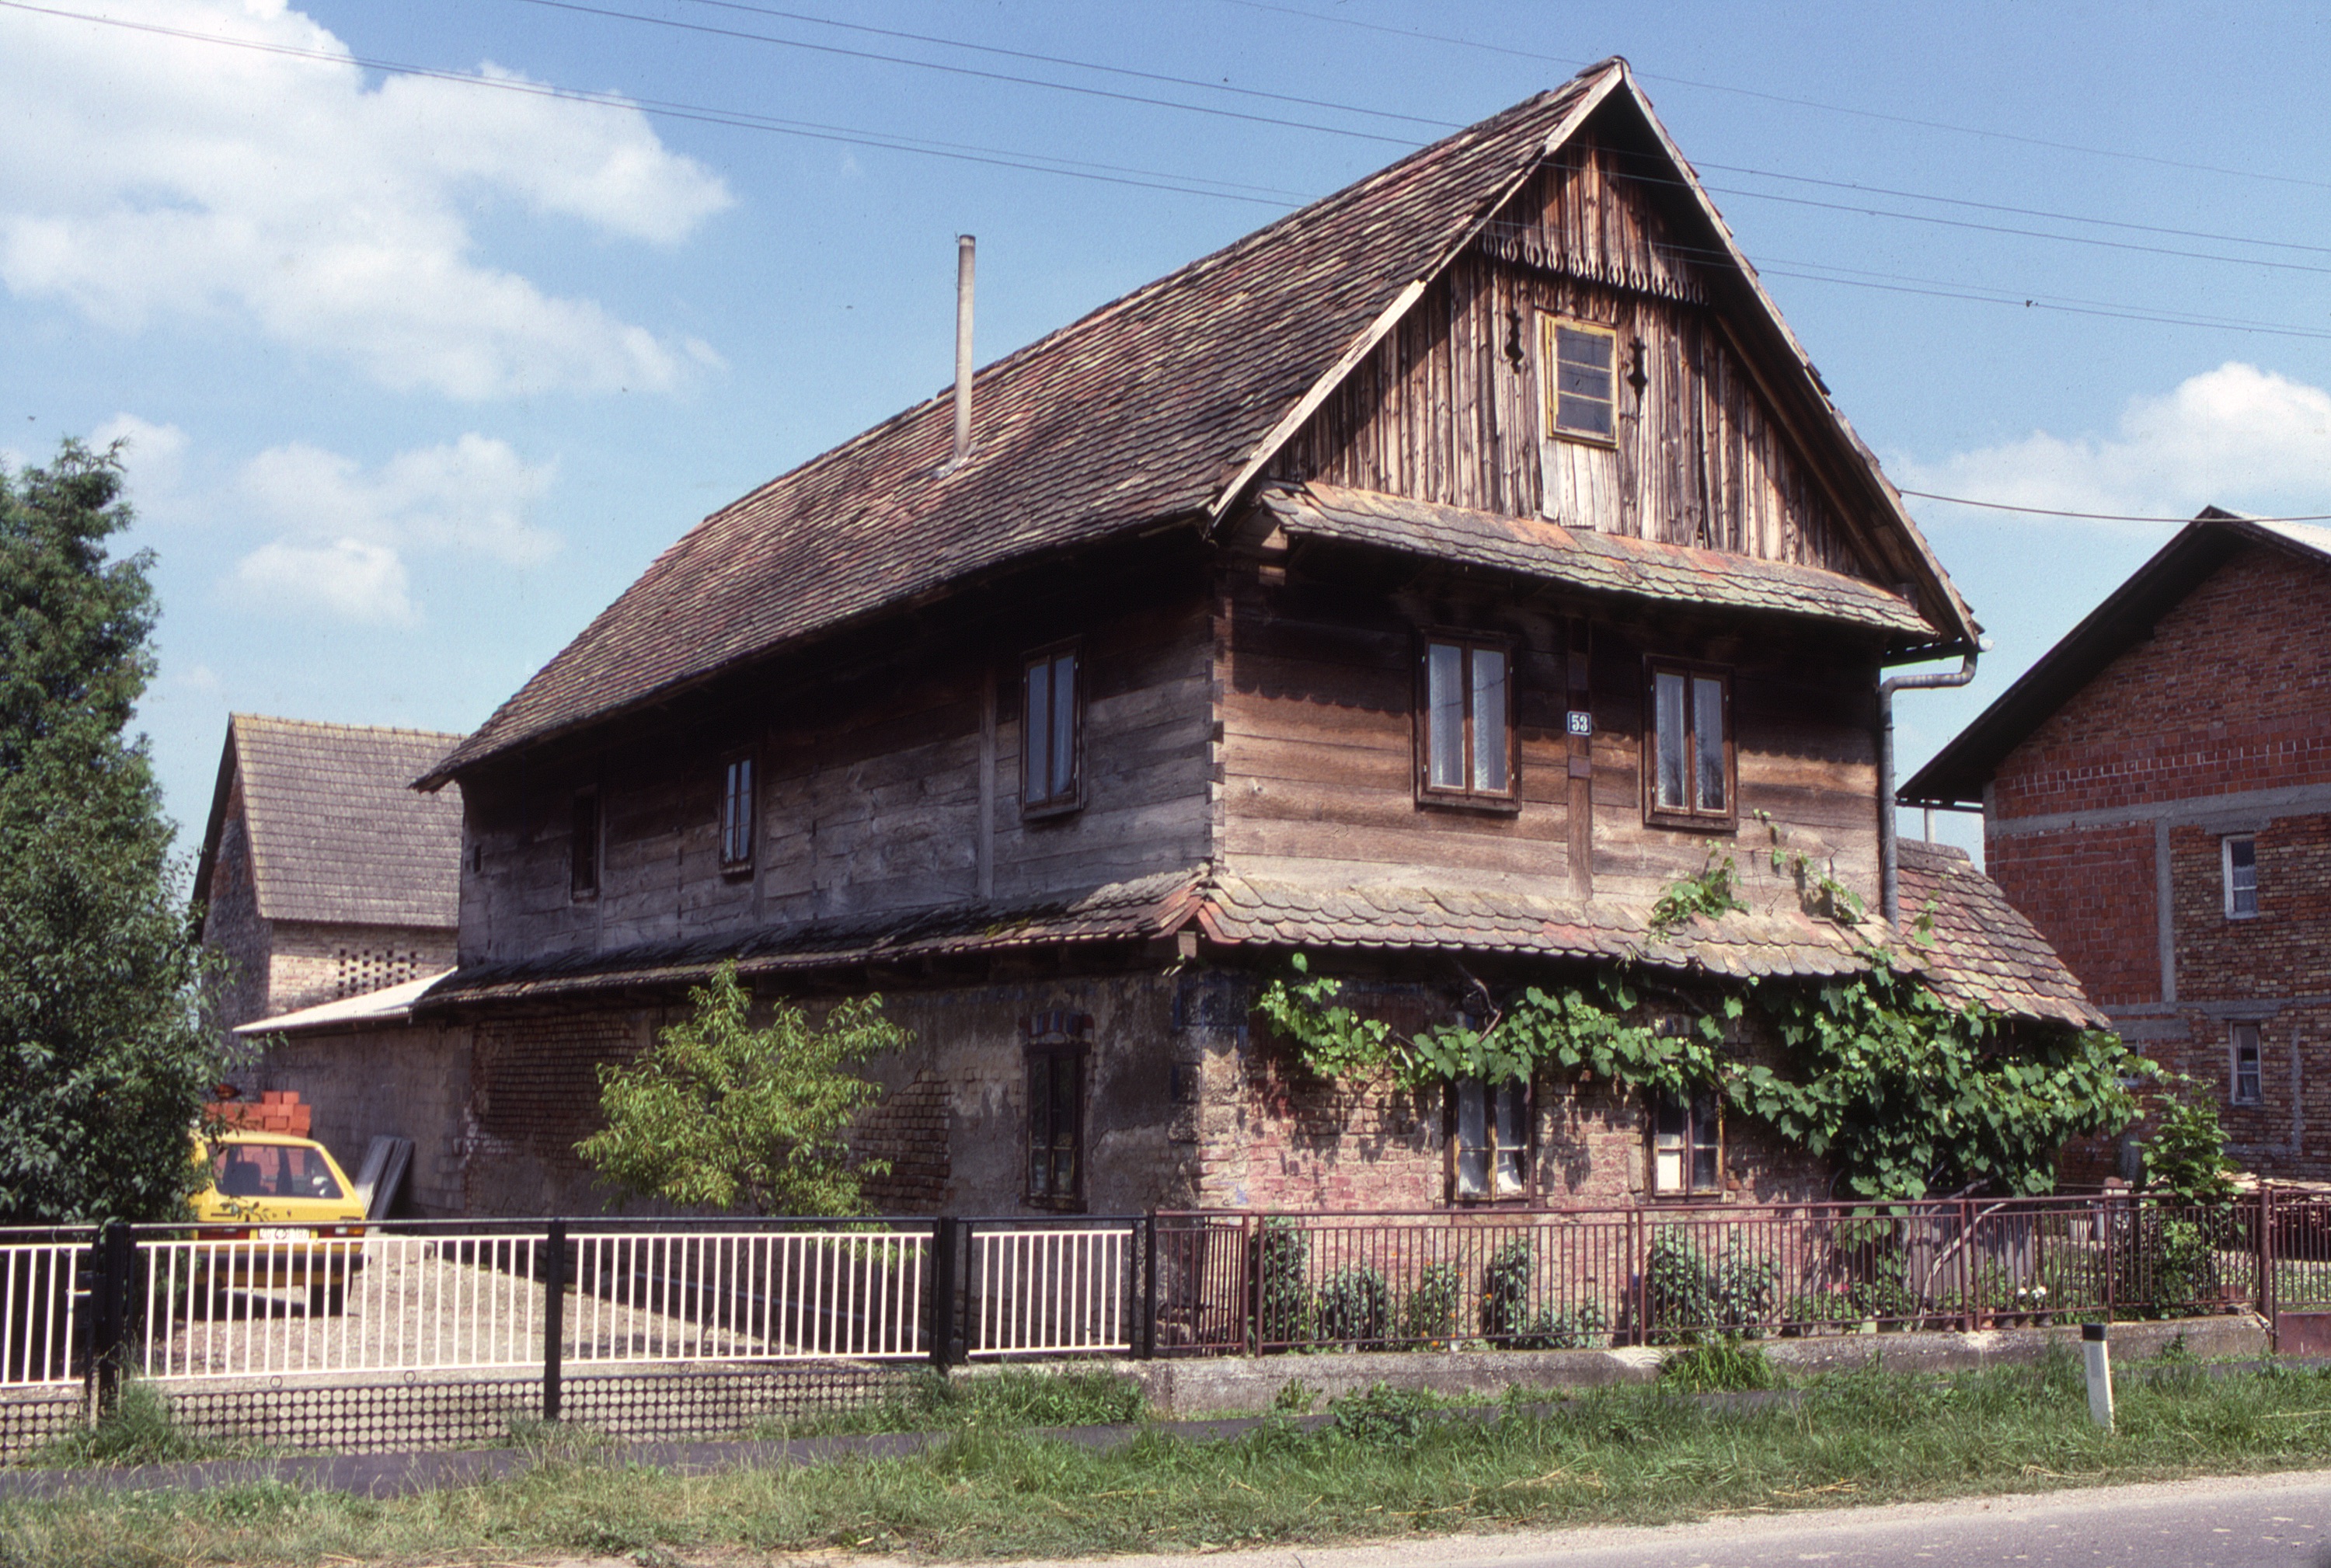 Judith Bing - <p>This wooden dwelling is referred to as a katnica or čardak in the region. Typically, these buildings have a gabled end and principal living spaces facing the street, and are constructed using oak planks with interlocking joinery at the corners. This čardak has been renovated with brick-faced walls at the ground level, which were originally constructed of exposed wooden planks and the interior spaces used principally to store equipment, livestock and produce. The renovated ground level is used as additional dwelling space. (photo 1988)</p>